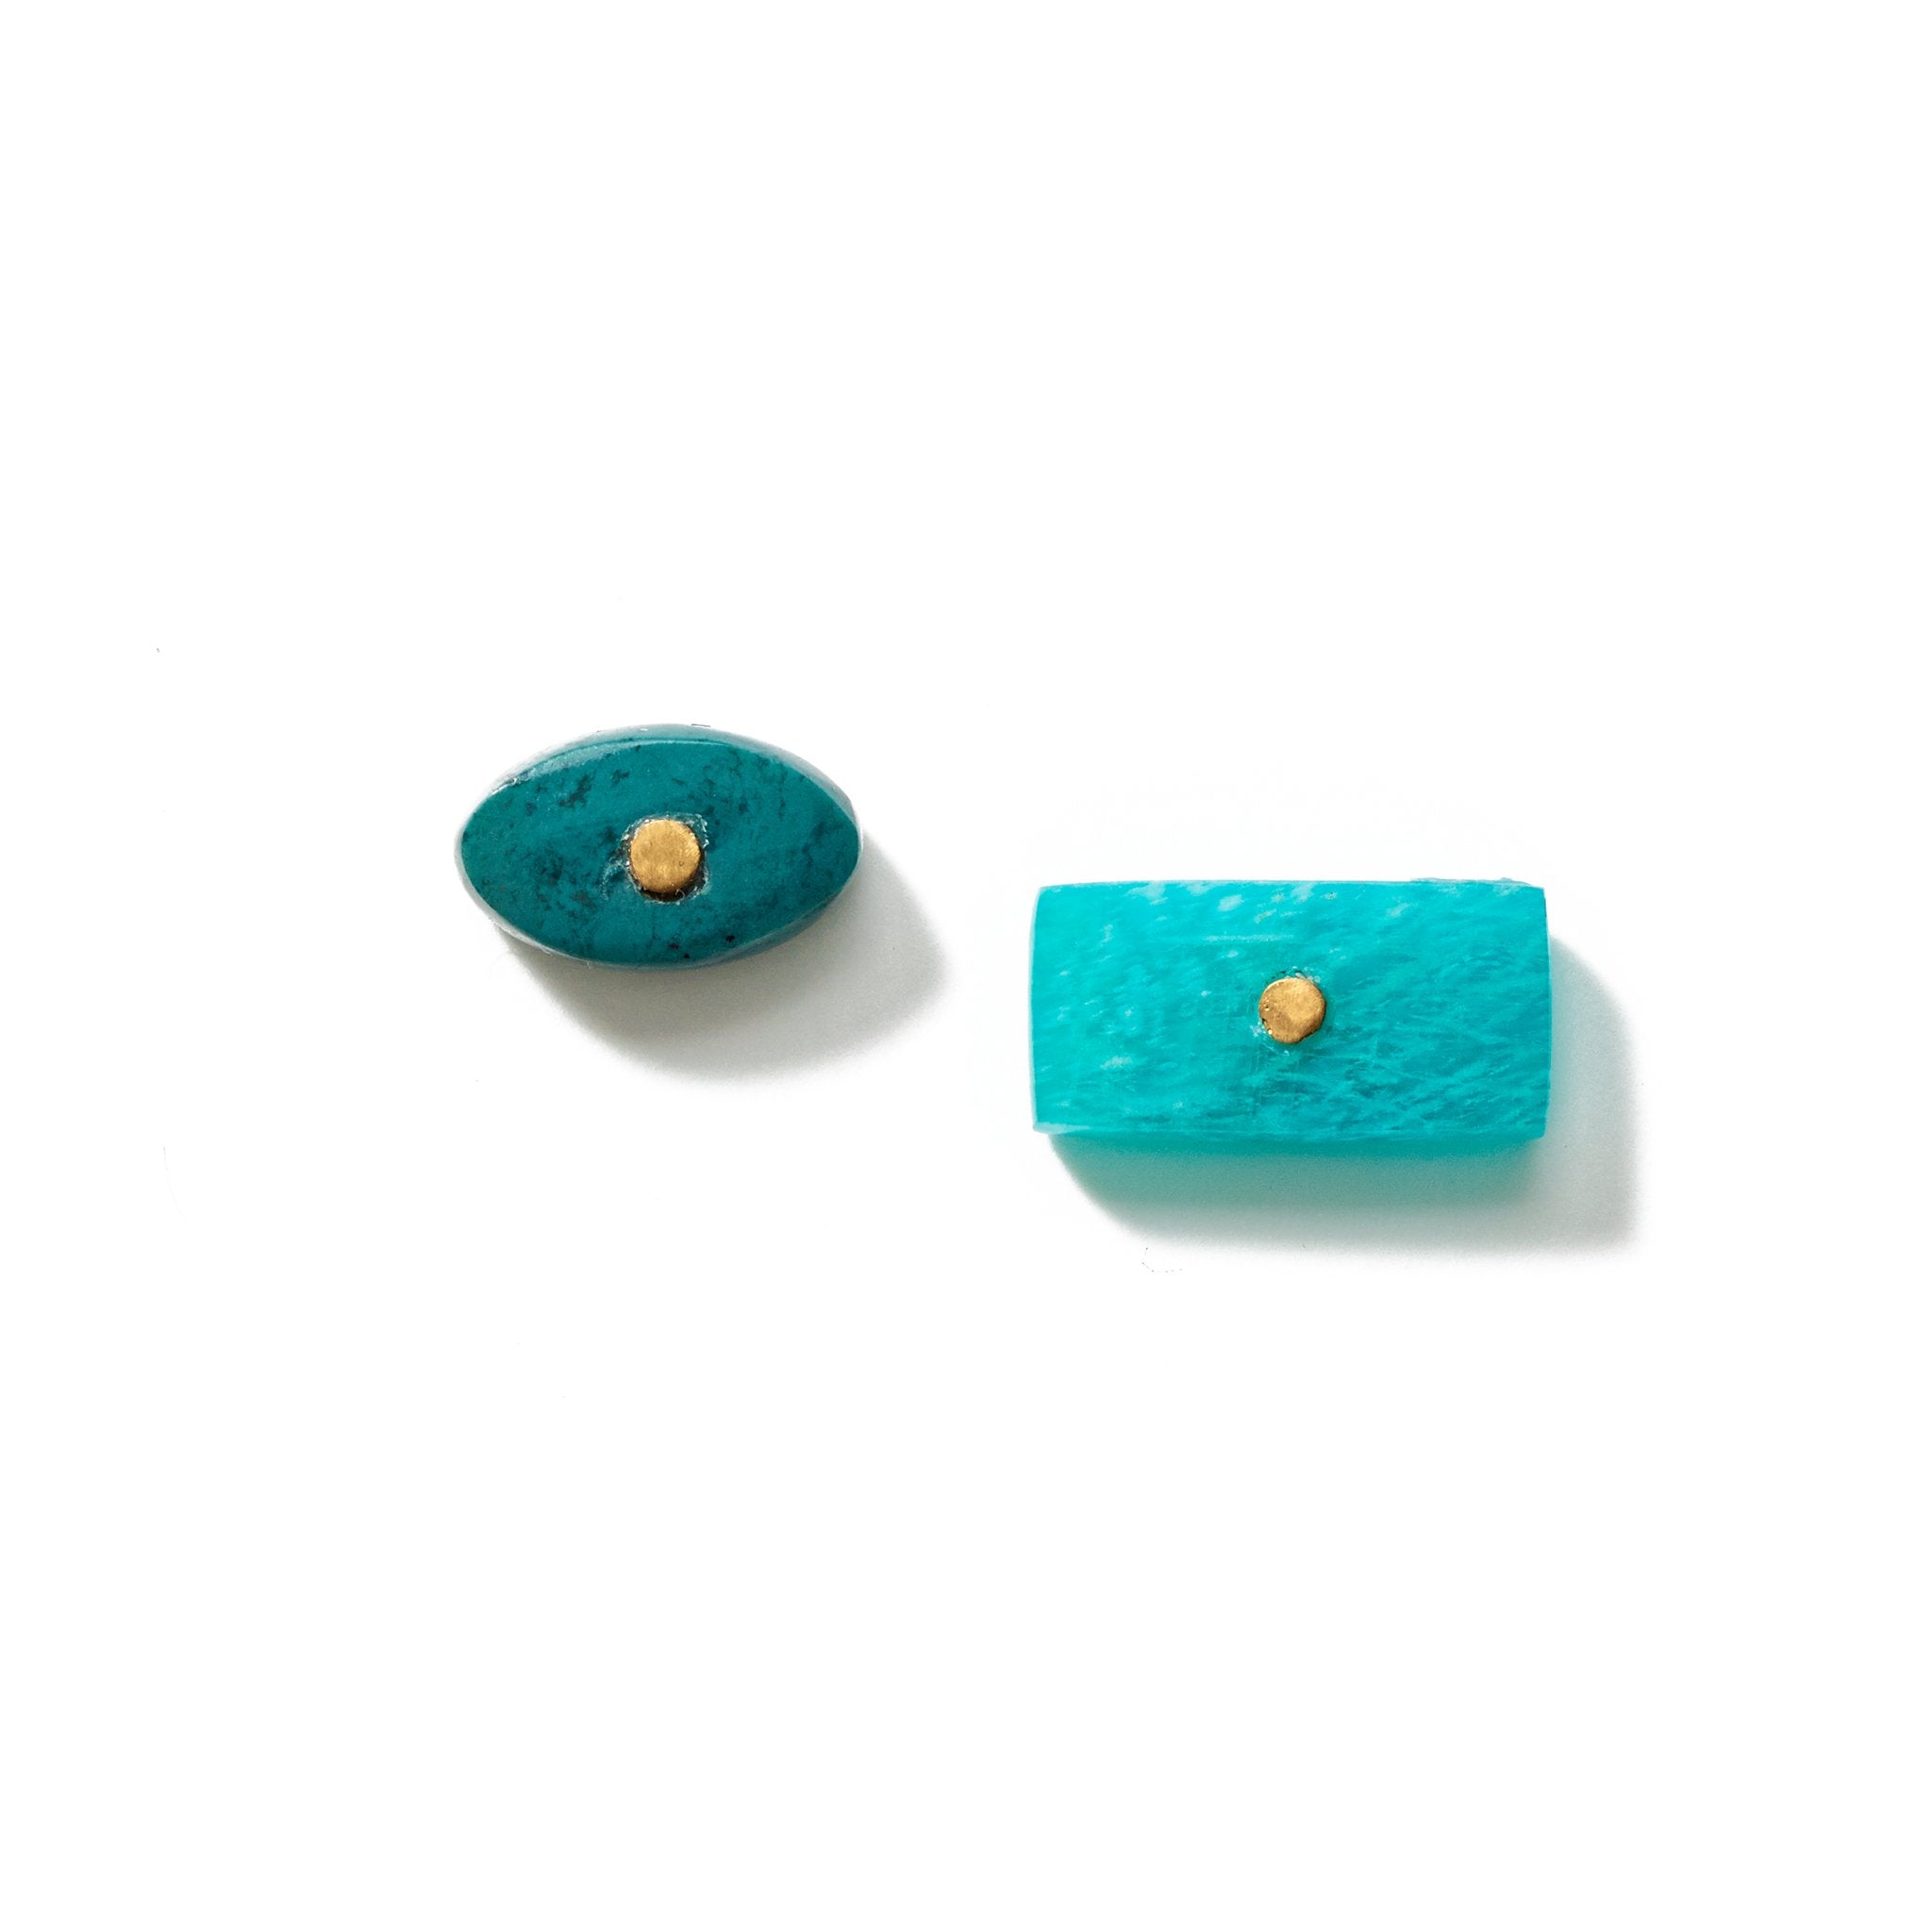 A striking pair of stud earrings that are always the center of attention, handcrafted from upcycled brass and ethically-sourced jasper and amazonite stones.